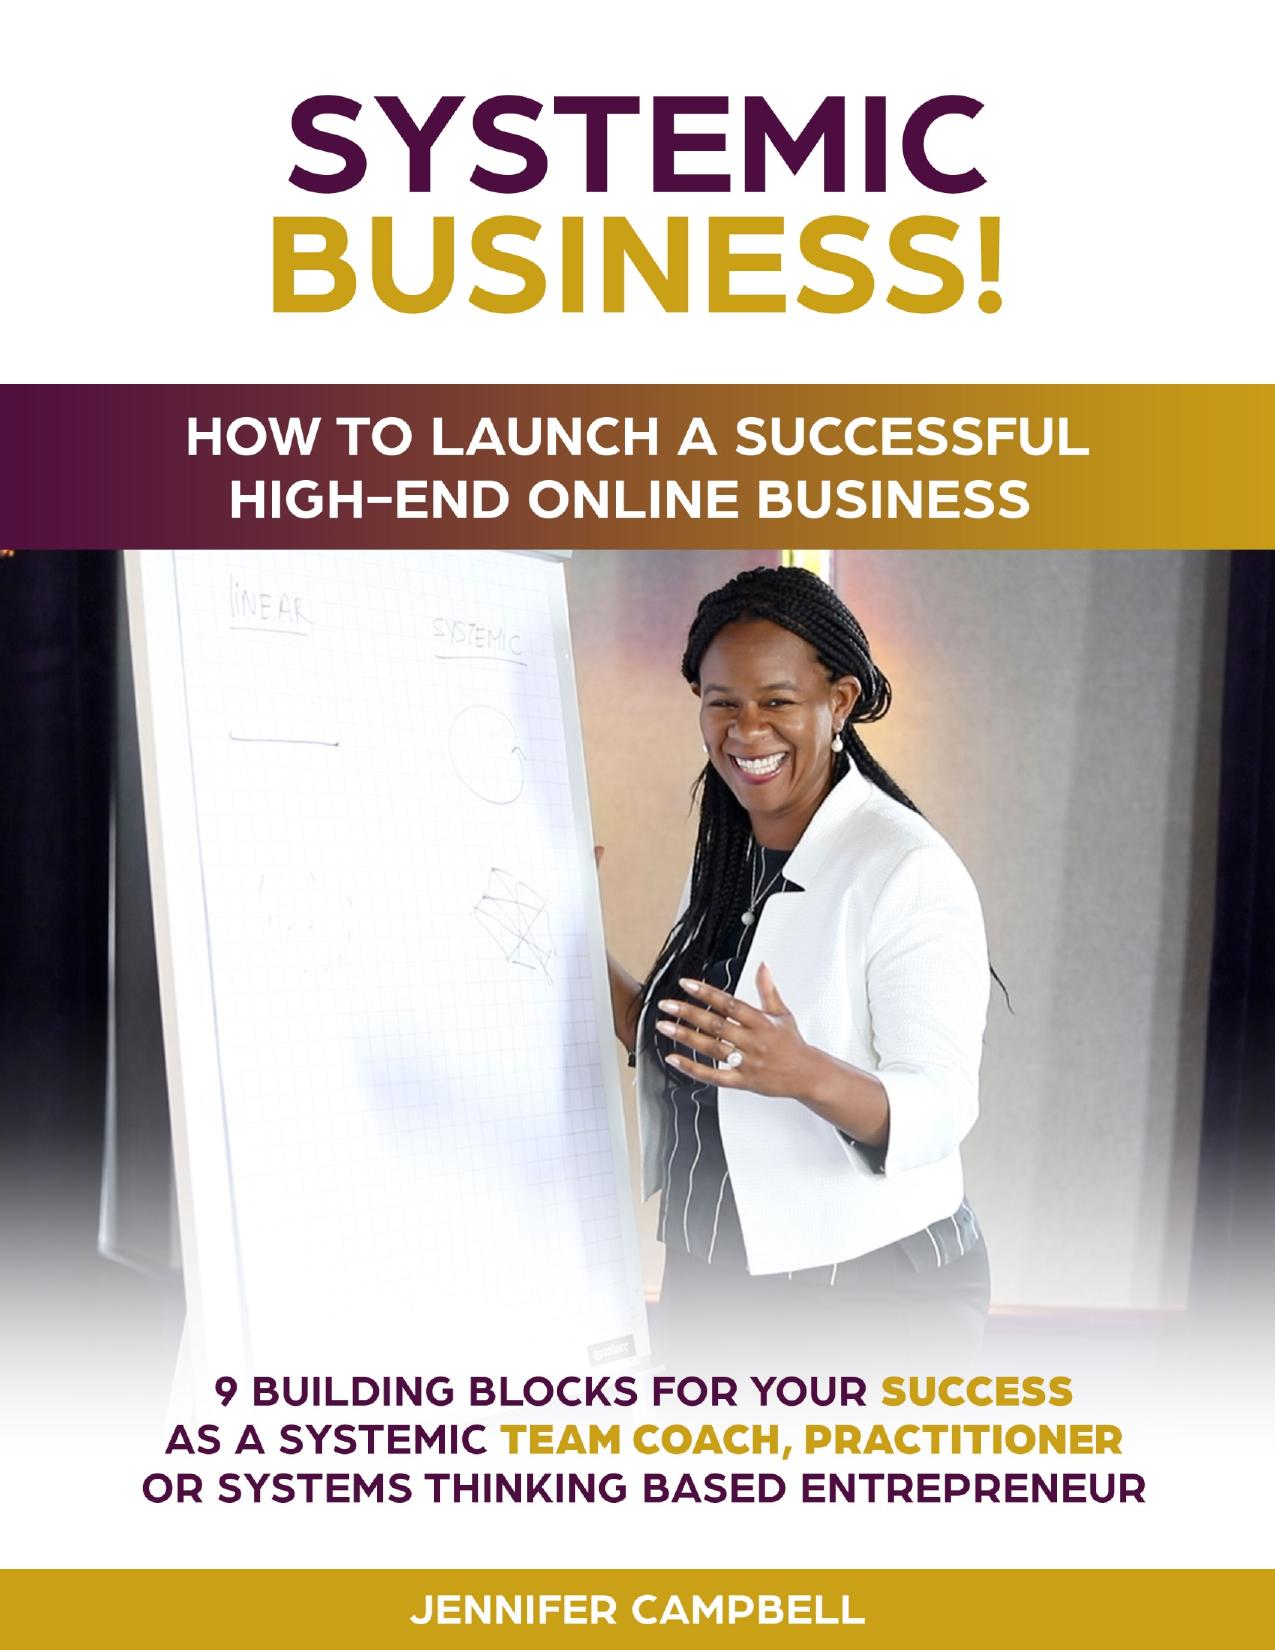 Systemic Business - How to Launch a Successful High-End Online Business